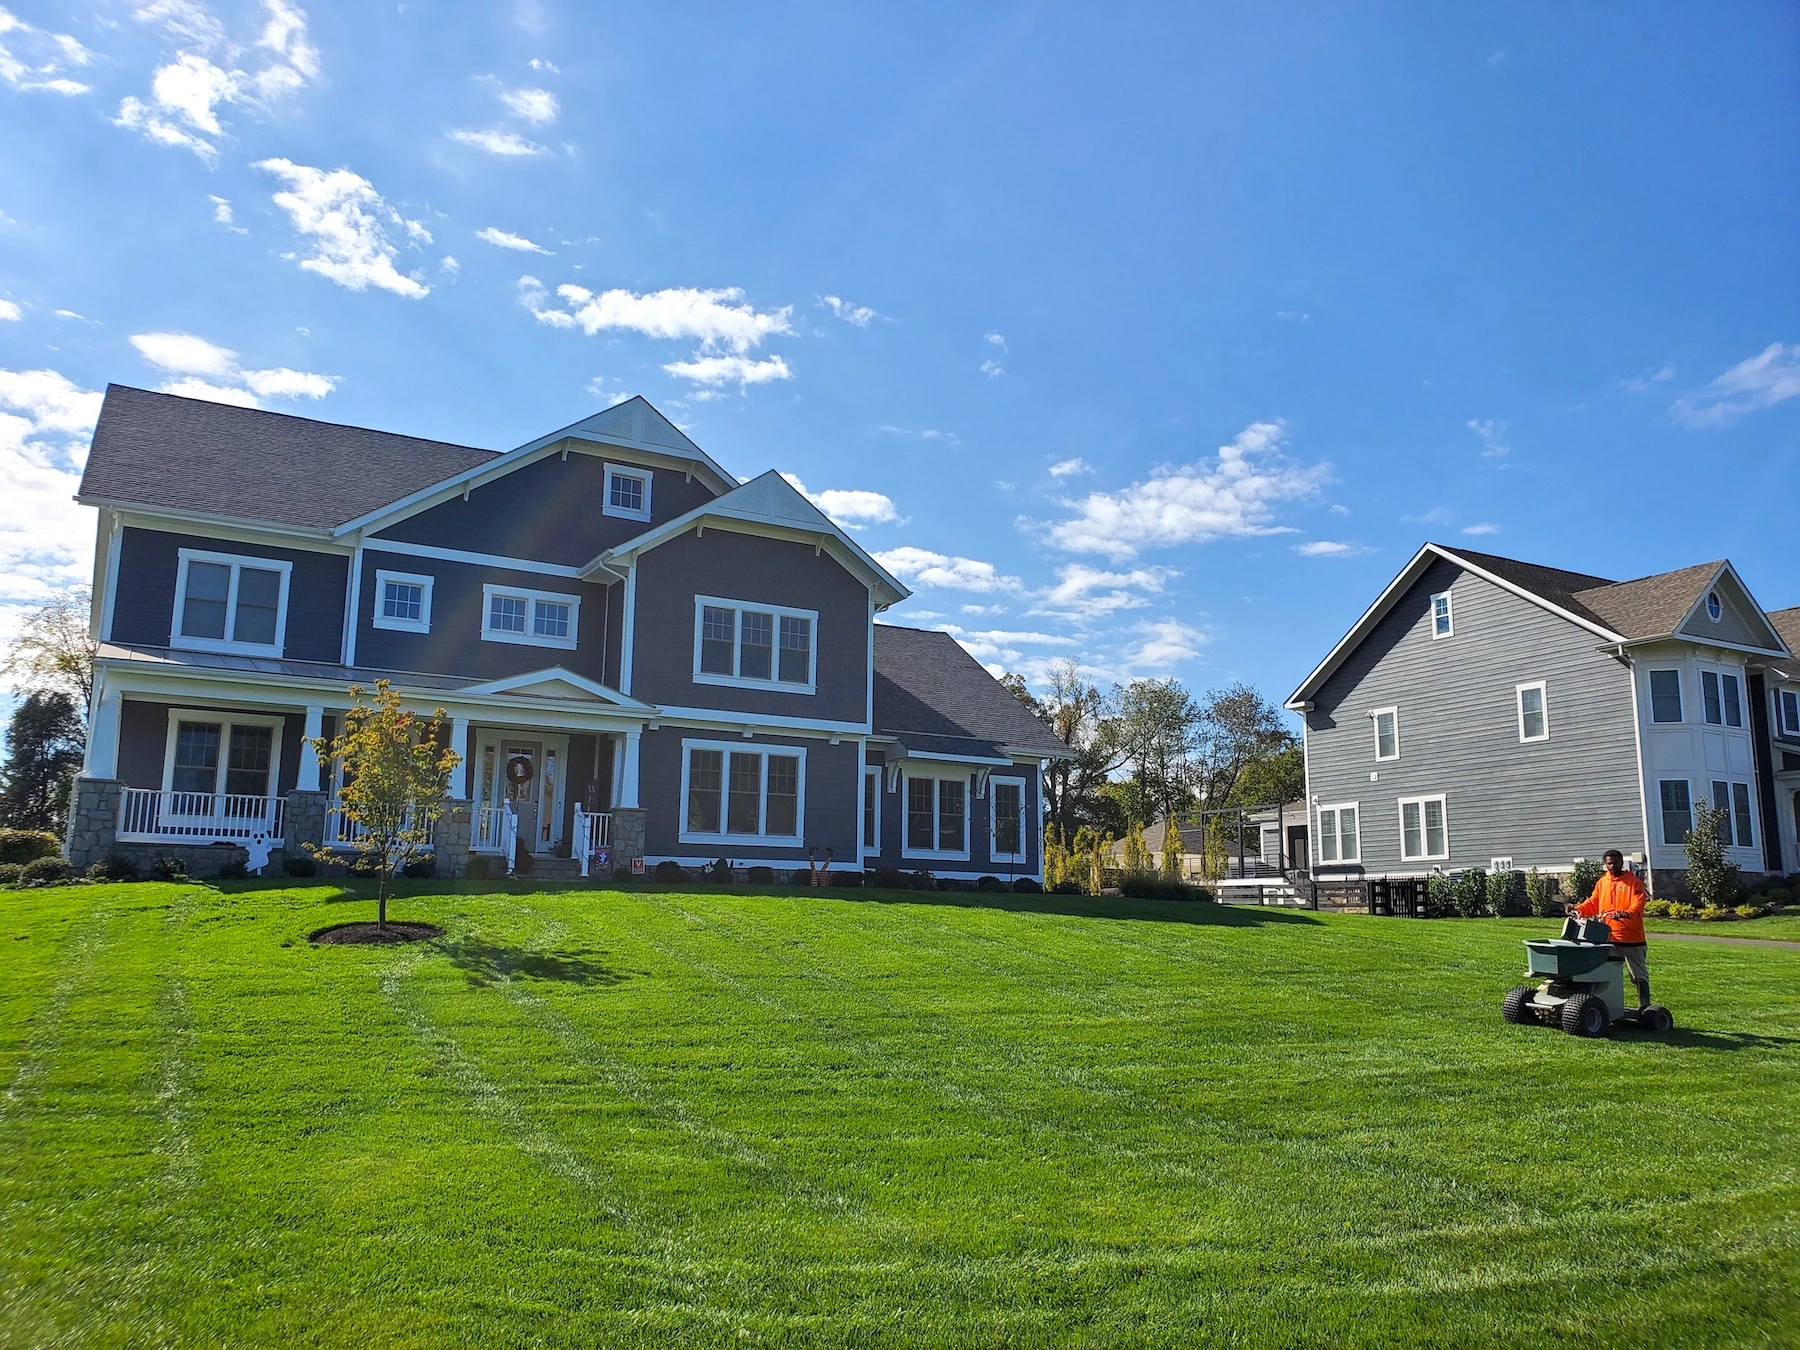 6 Steps to a Healthy, Green Lawn in Northern Virginia